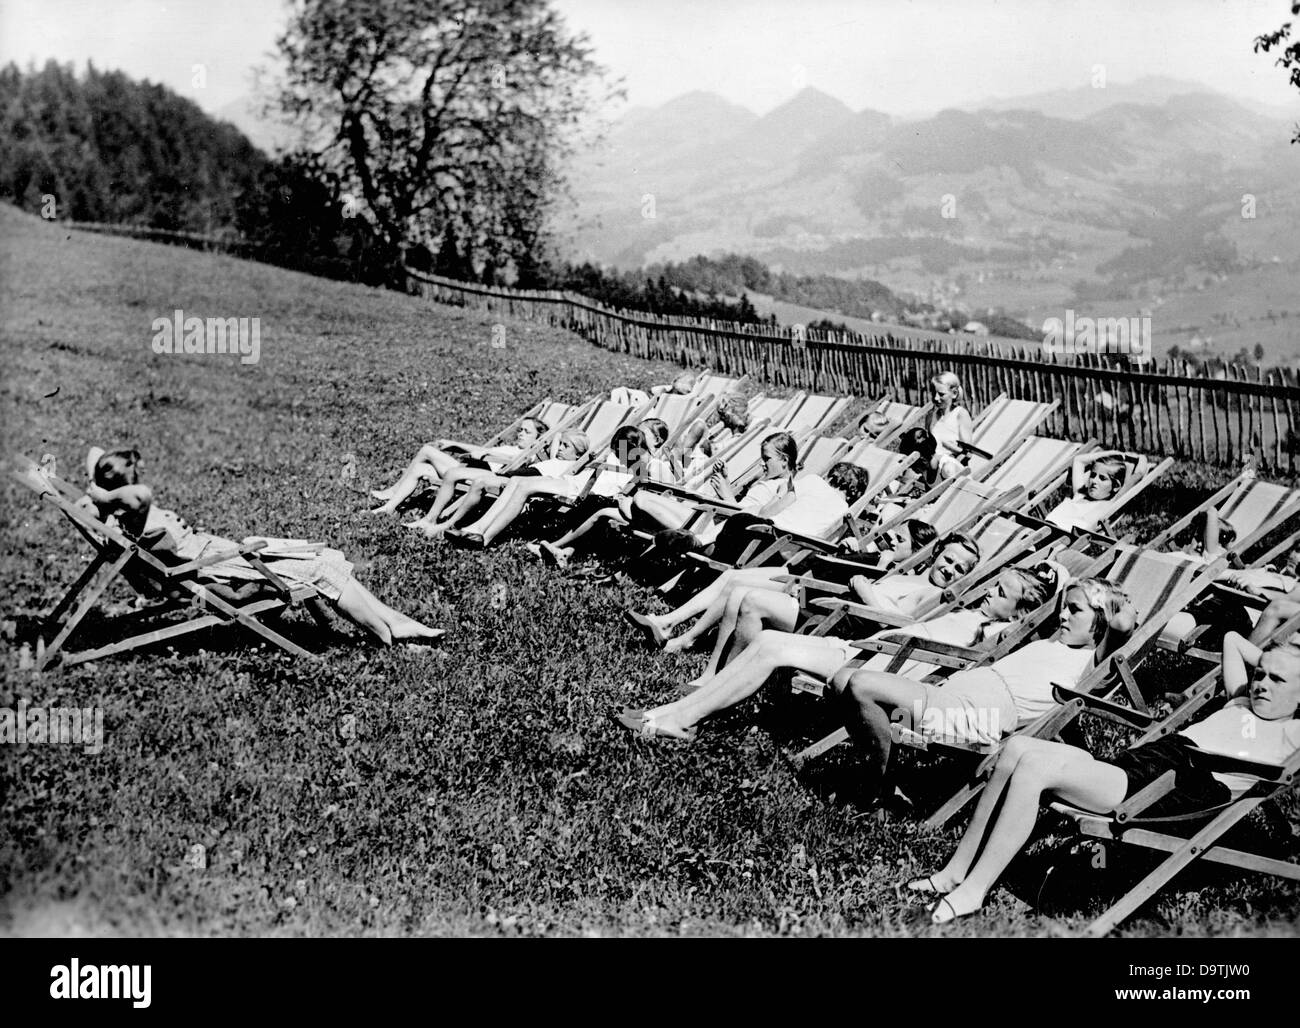 Girls are relaxing on deck chairs in a Children's Evacuation Program camps of the National Socialist People's Welfare, in April 1943. Fotoarchiv für Zeitgeschichte Stock Photo